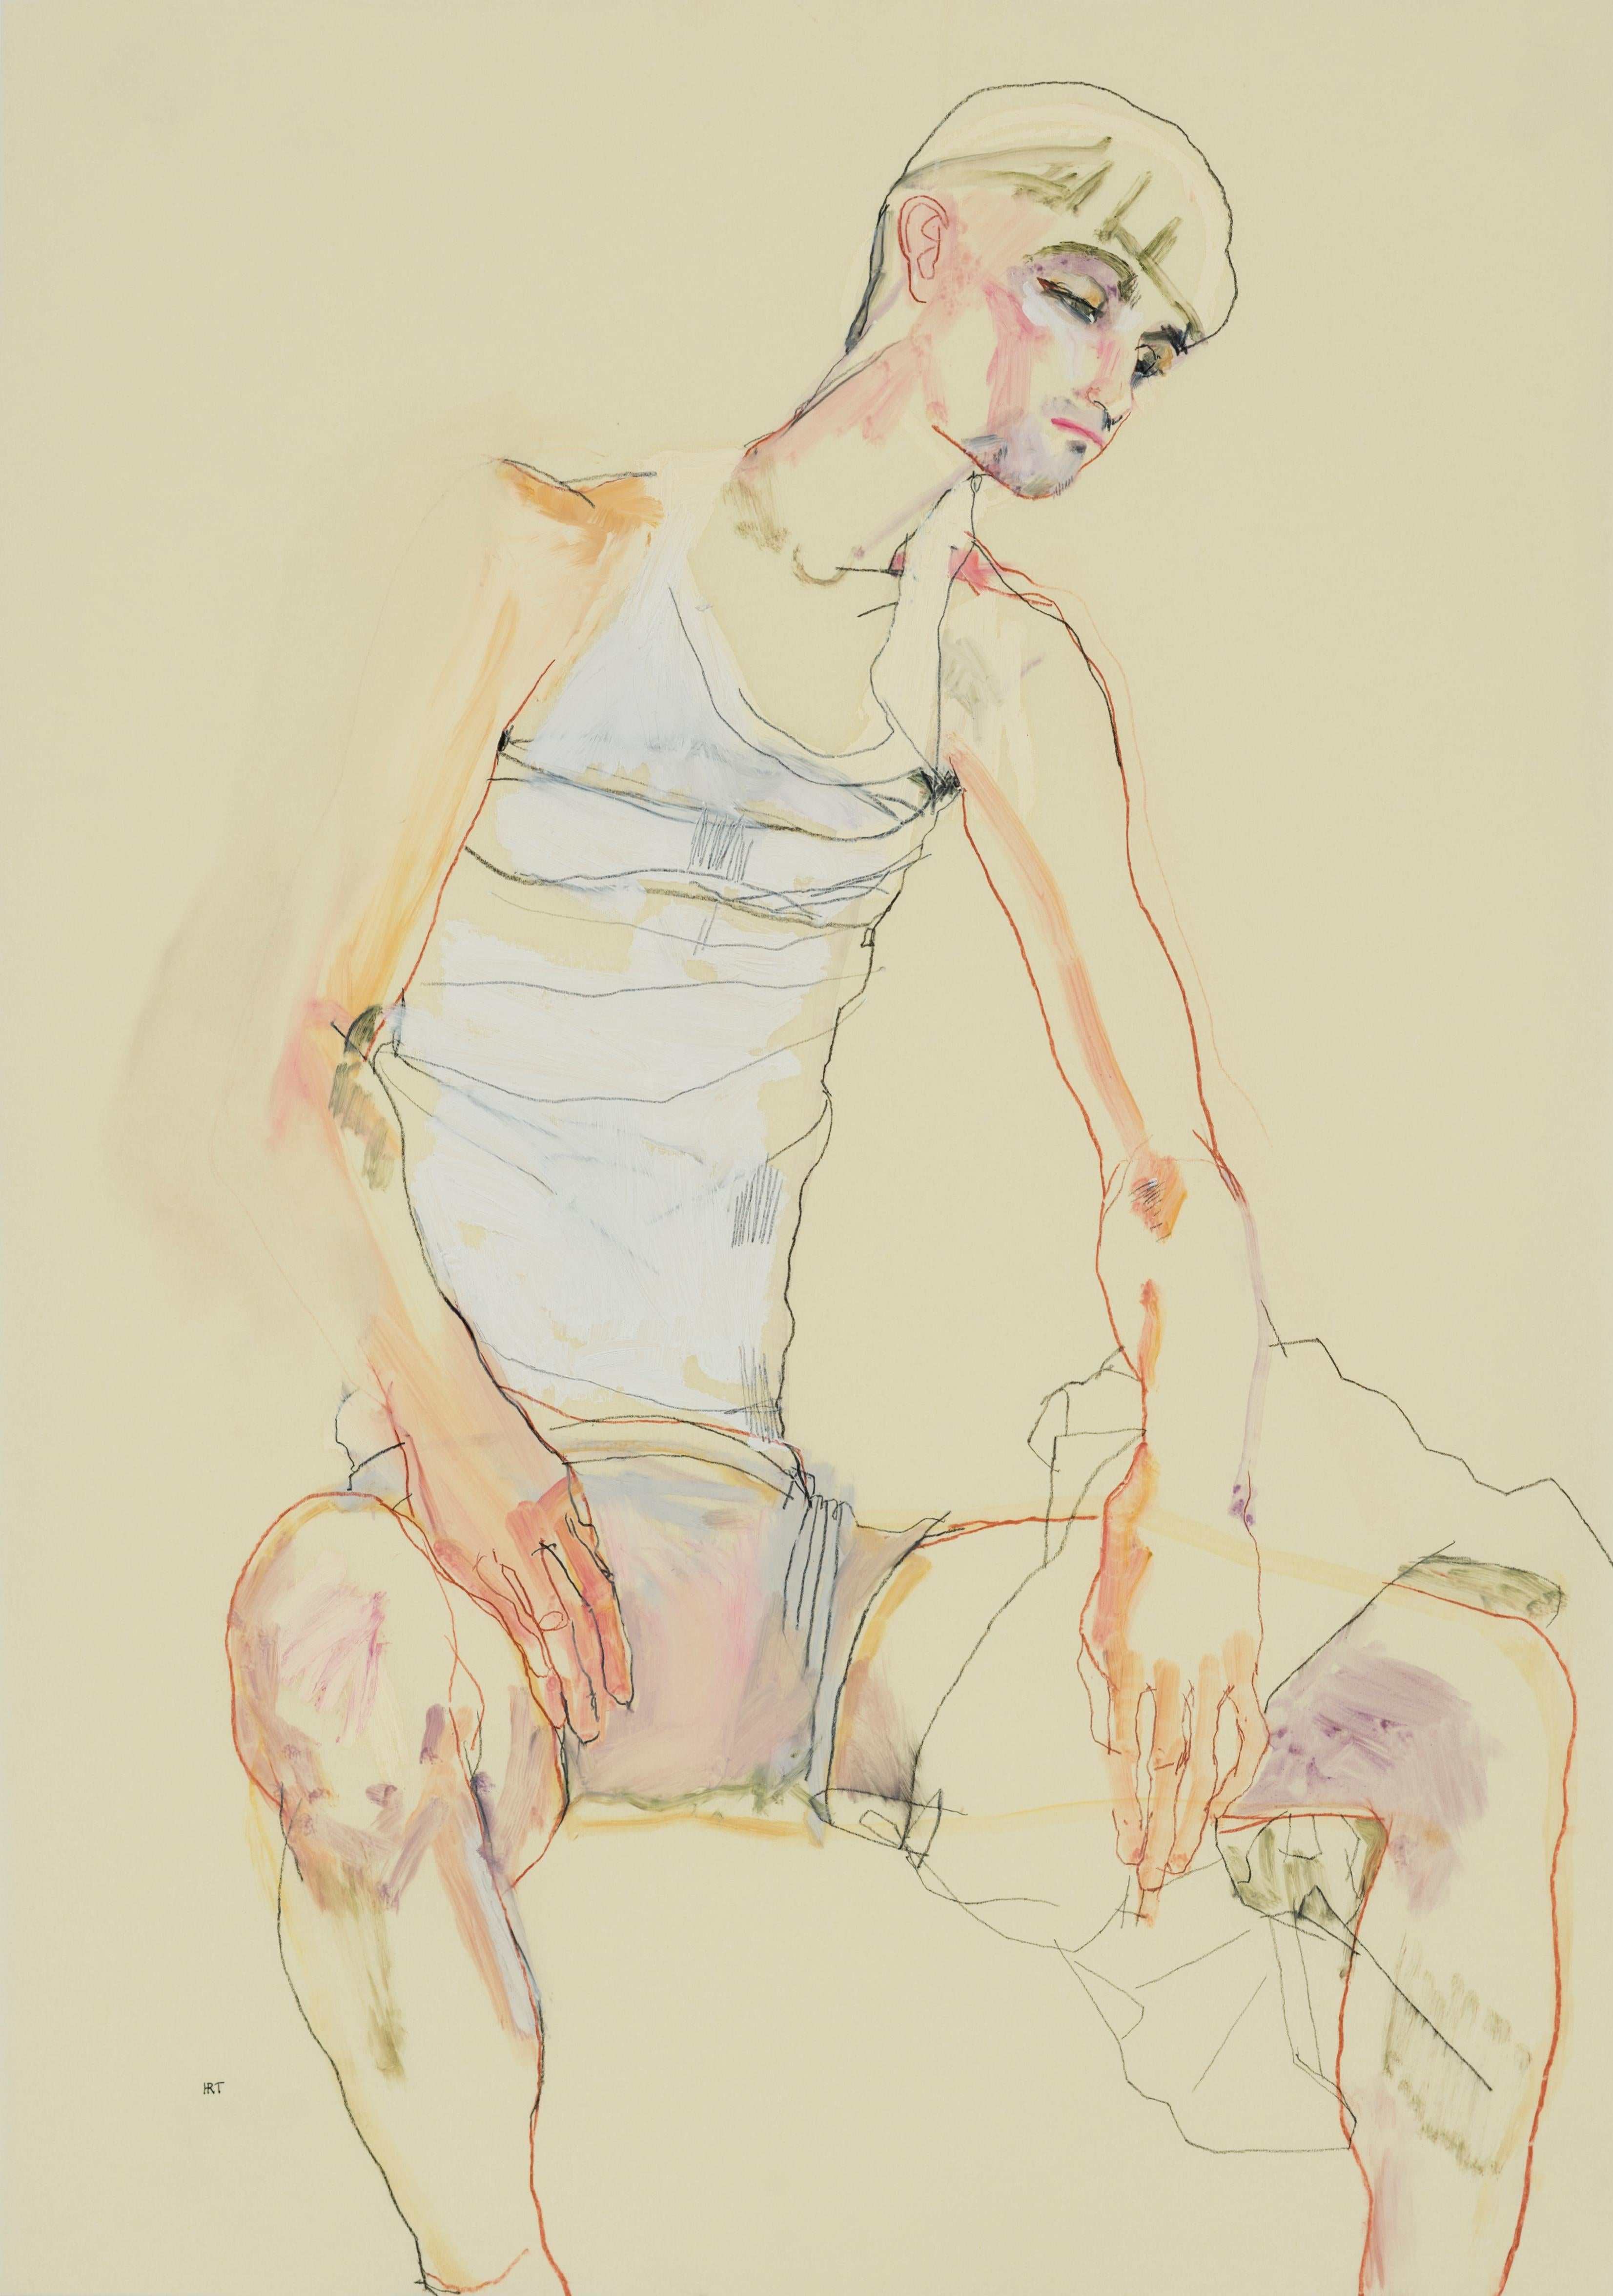 Andrew (Sitting, Hands on Thighs), Mixed media on Pergamenata parchment